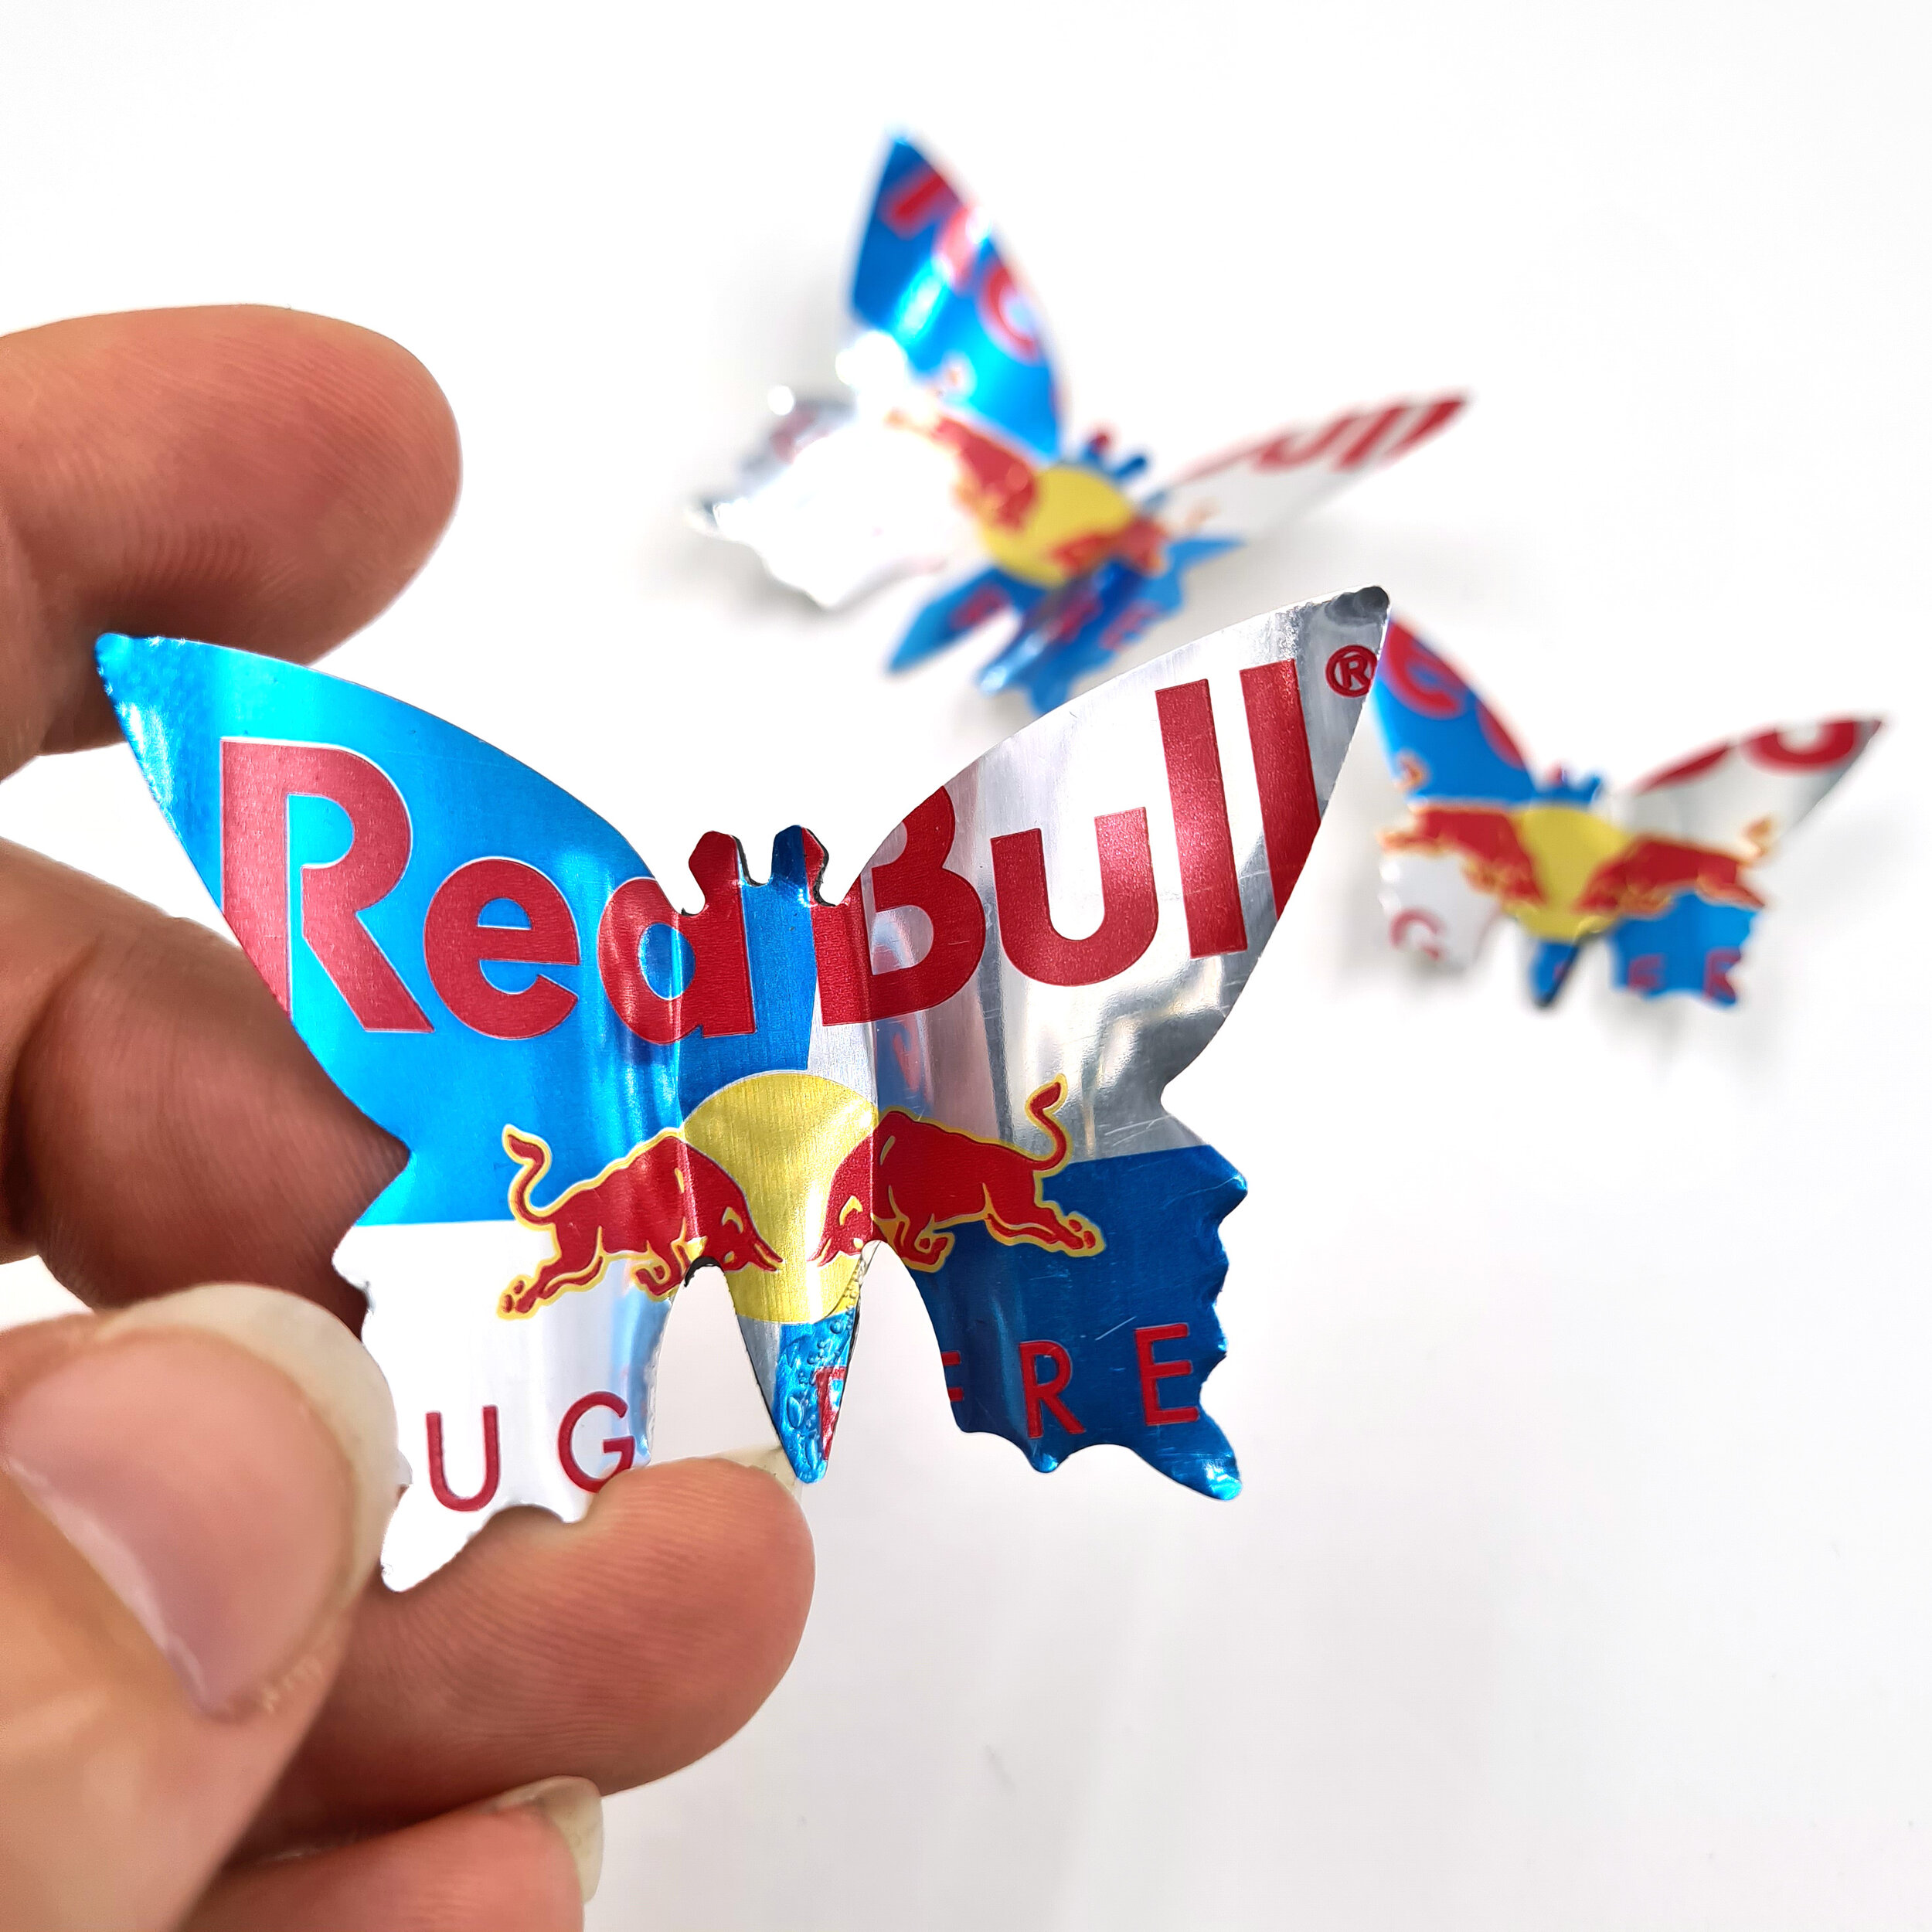 Red Creative sustainable Red Bull Sugar Free Butterfly Can Magnets holding